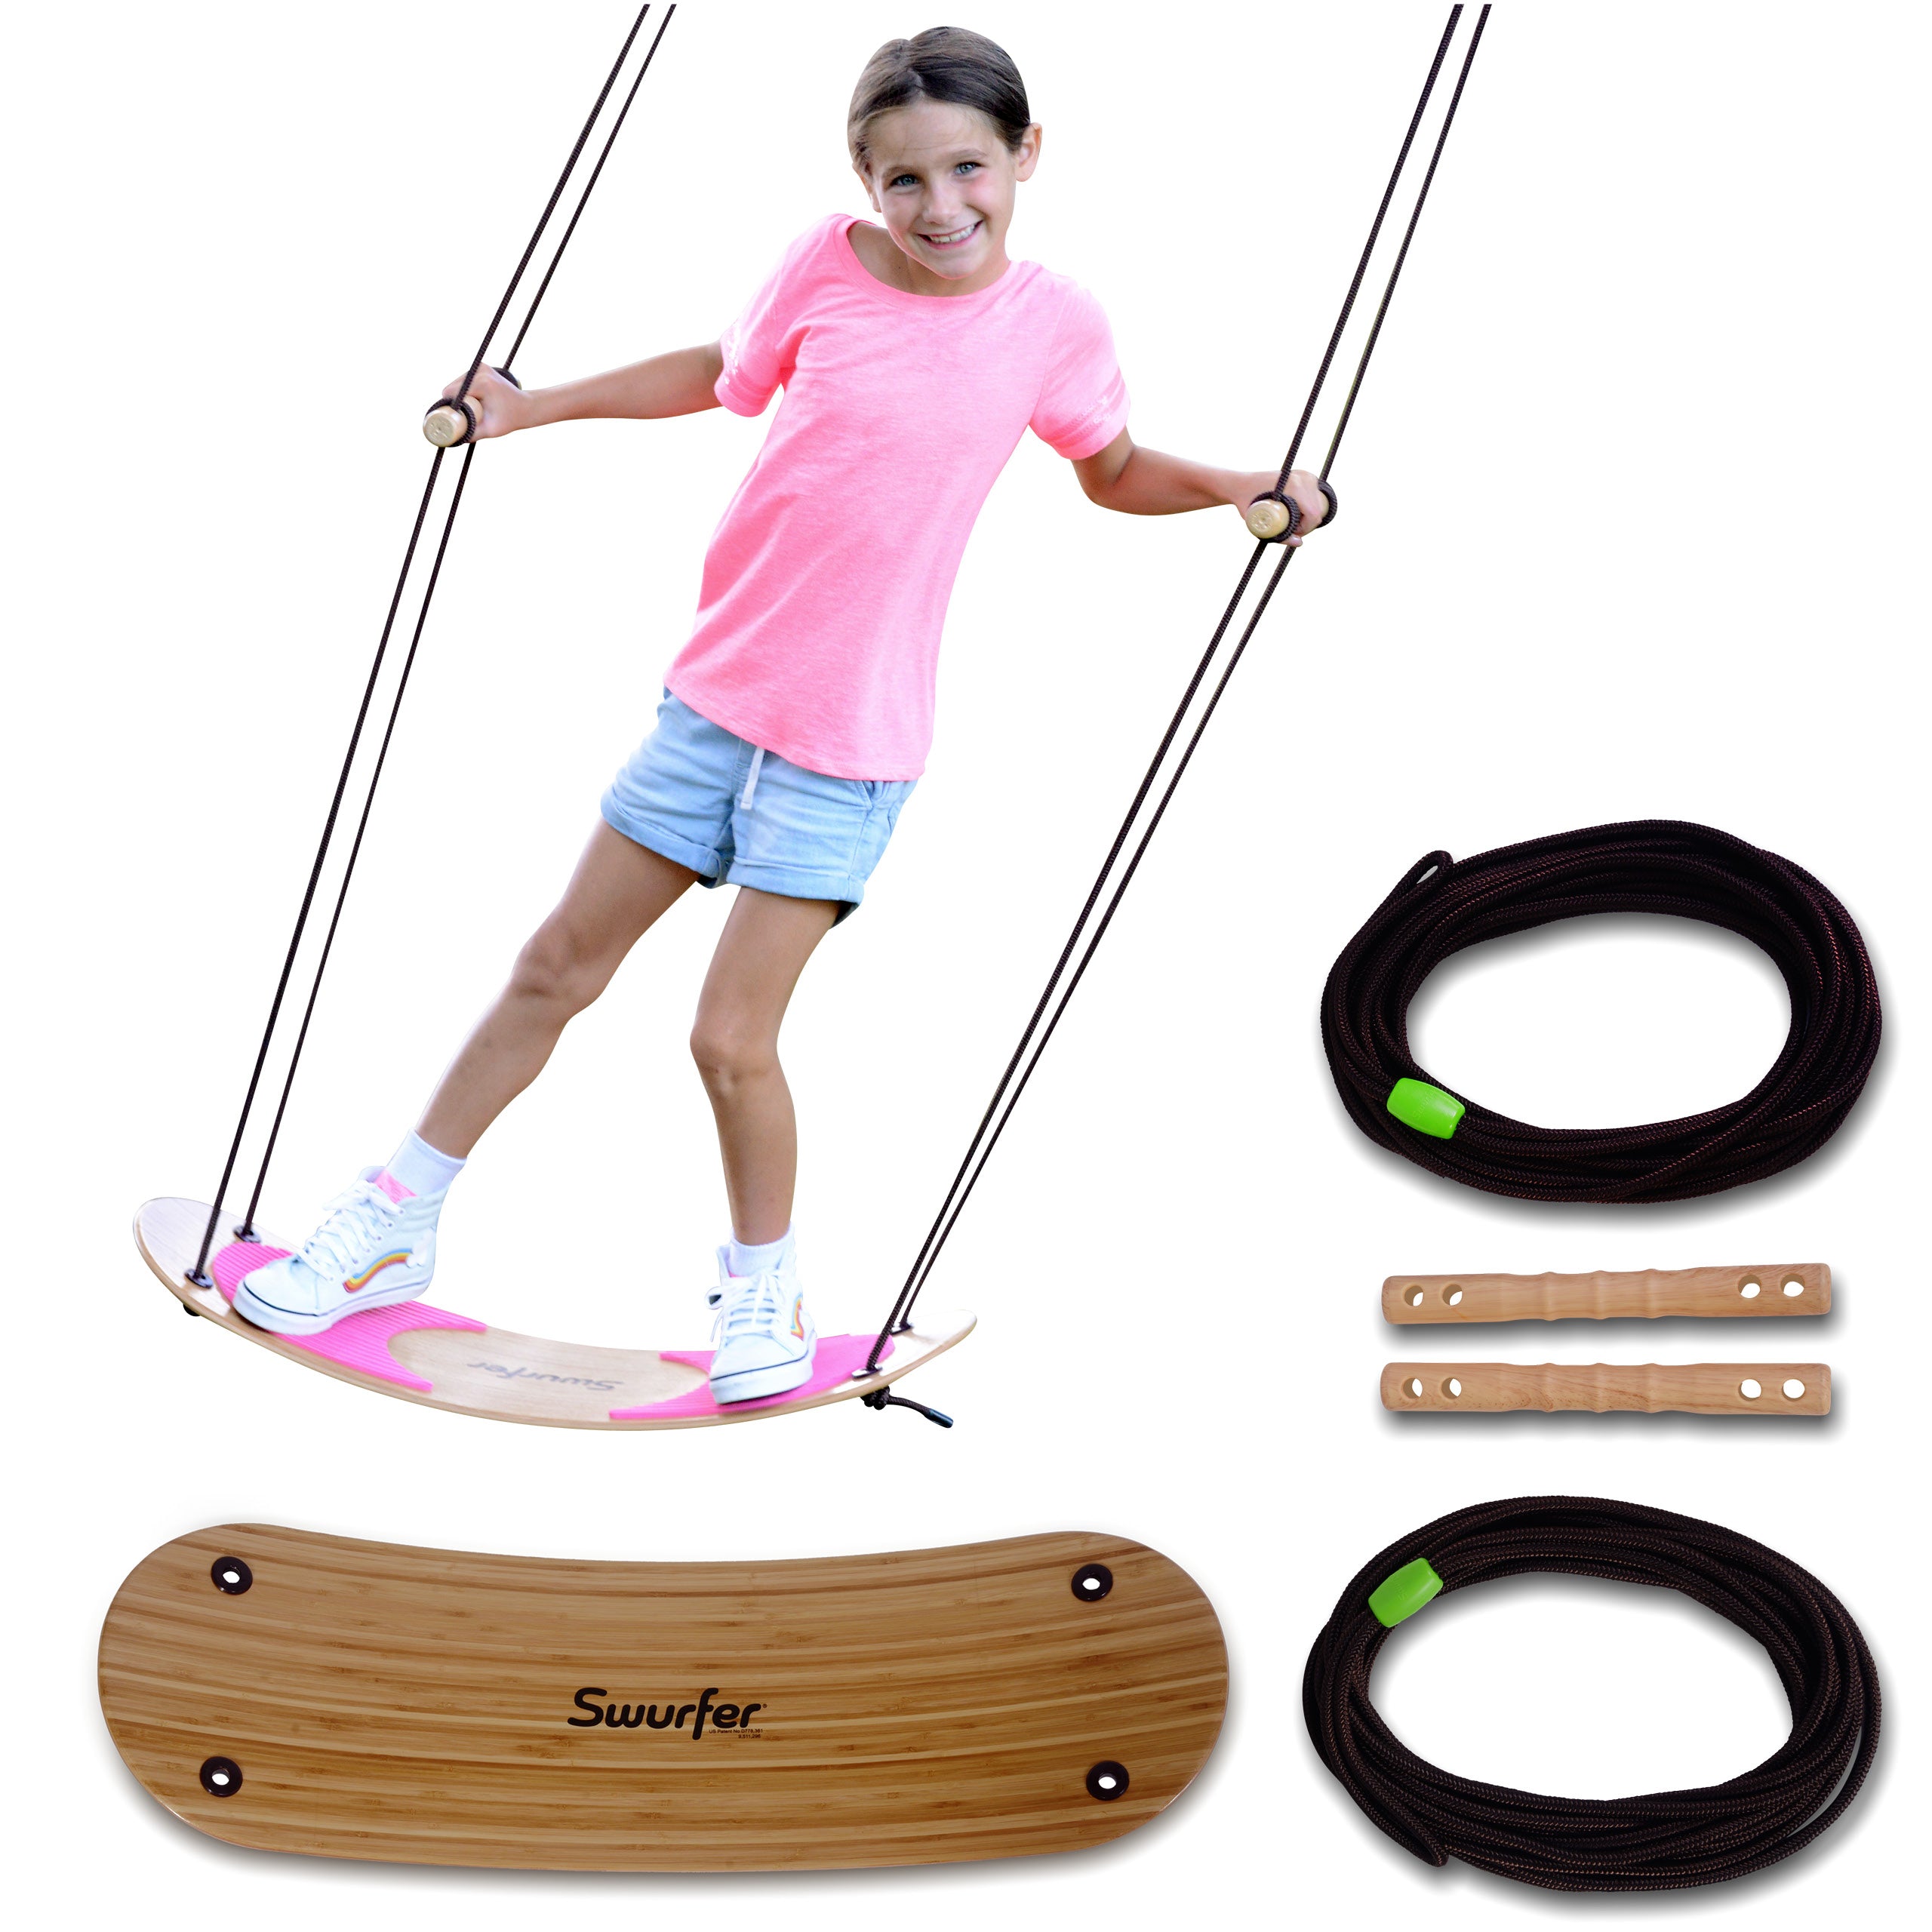 Swurfer Stand Up Surfing Tree Swing - Sustainable Bamboo